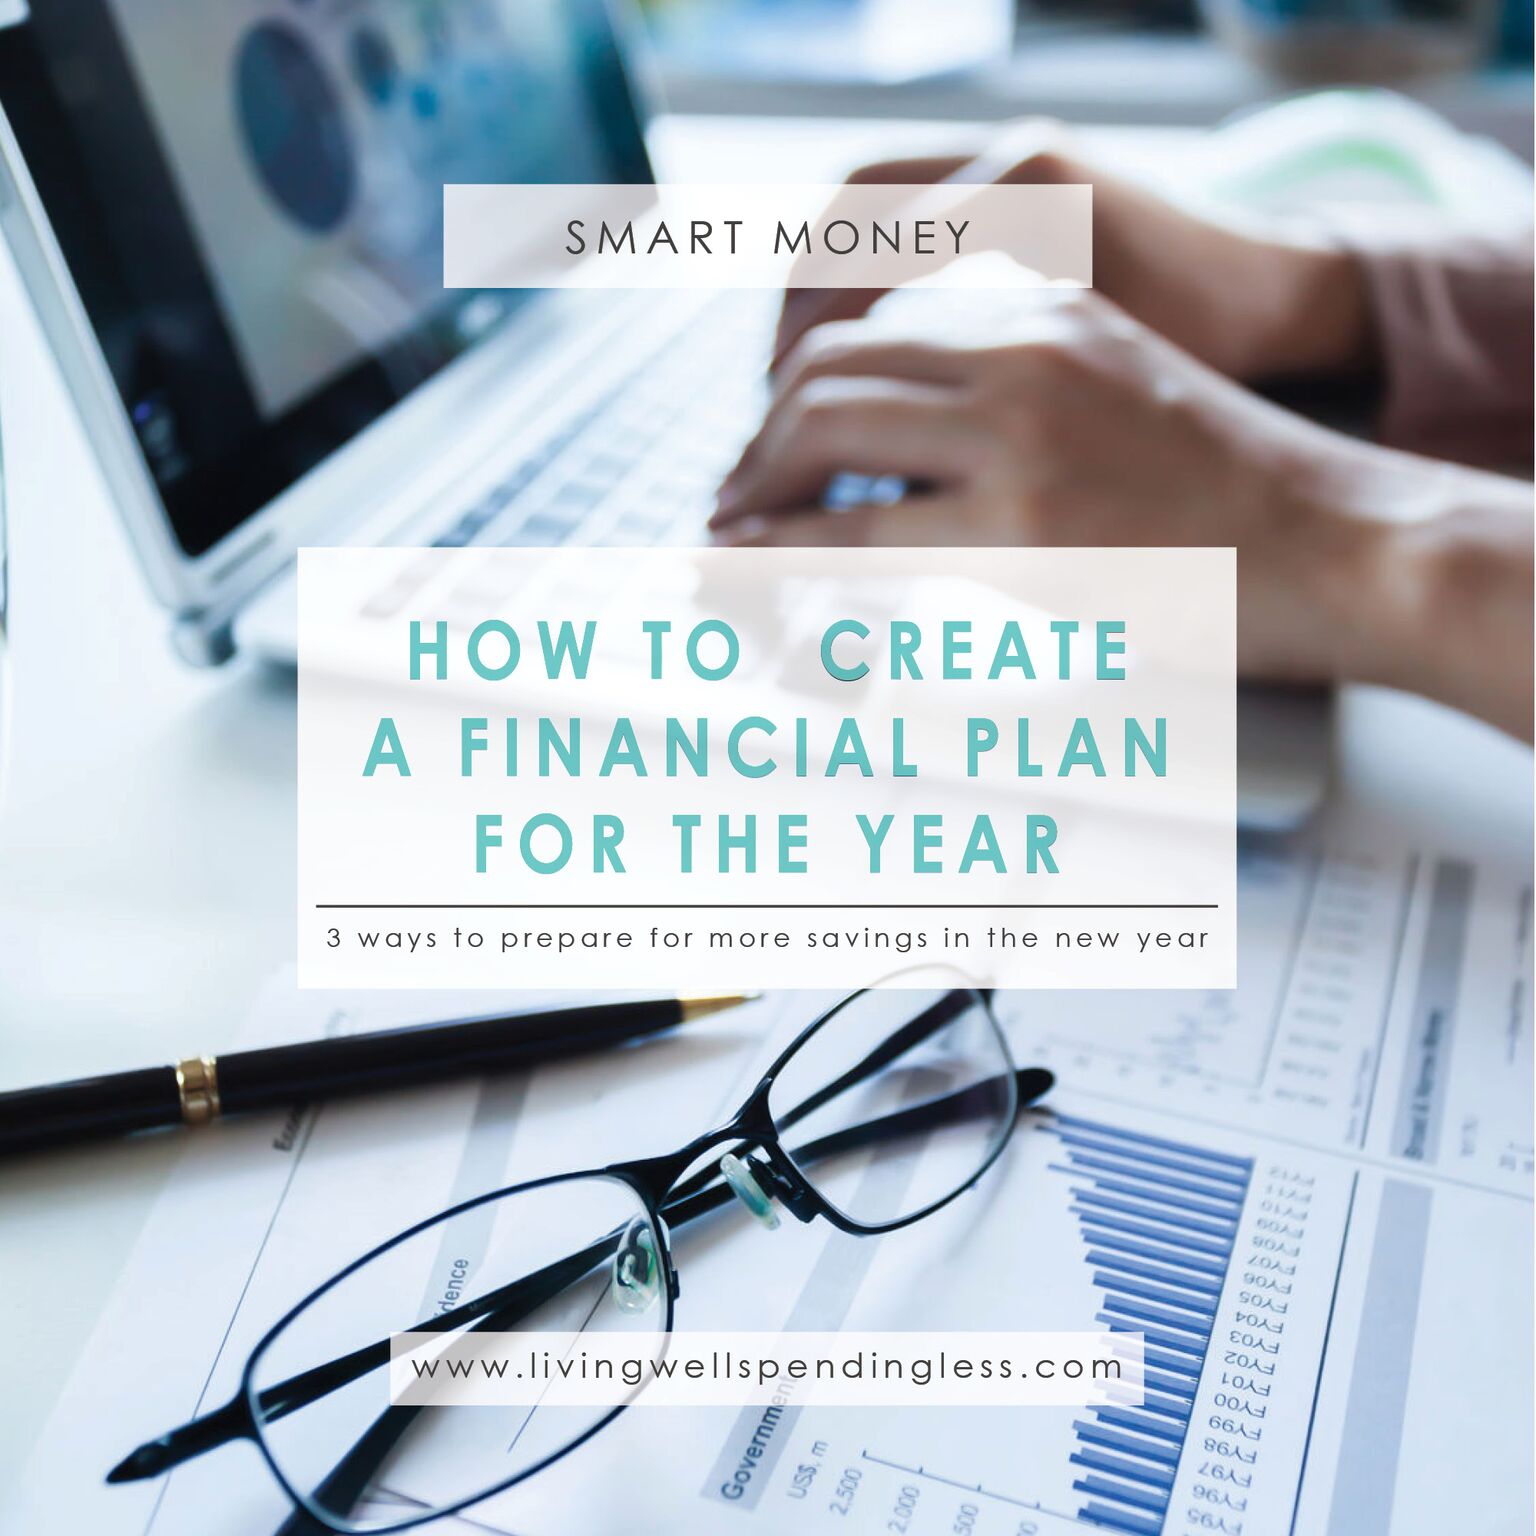 How to Create a Financial Plan for the Year | Living Well Spending Less®